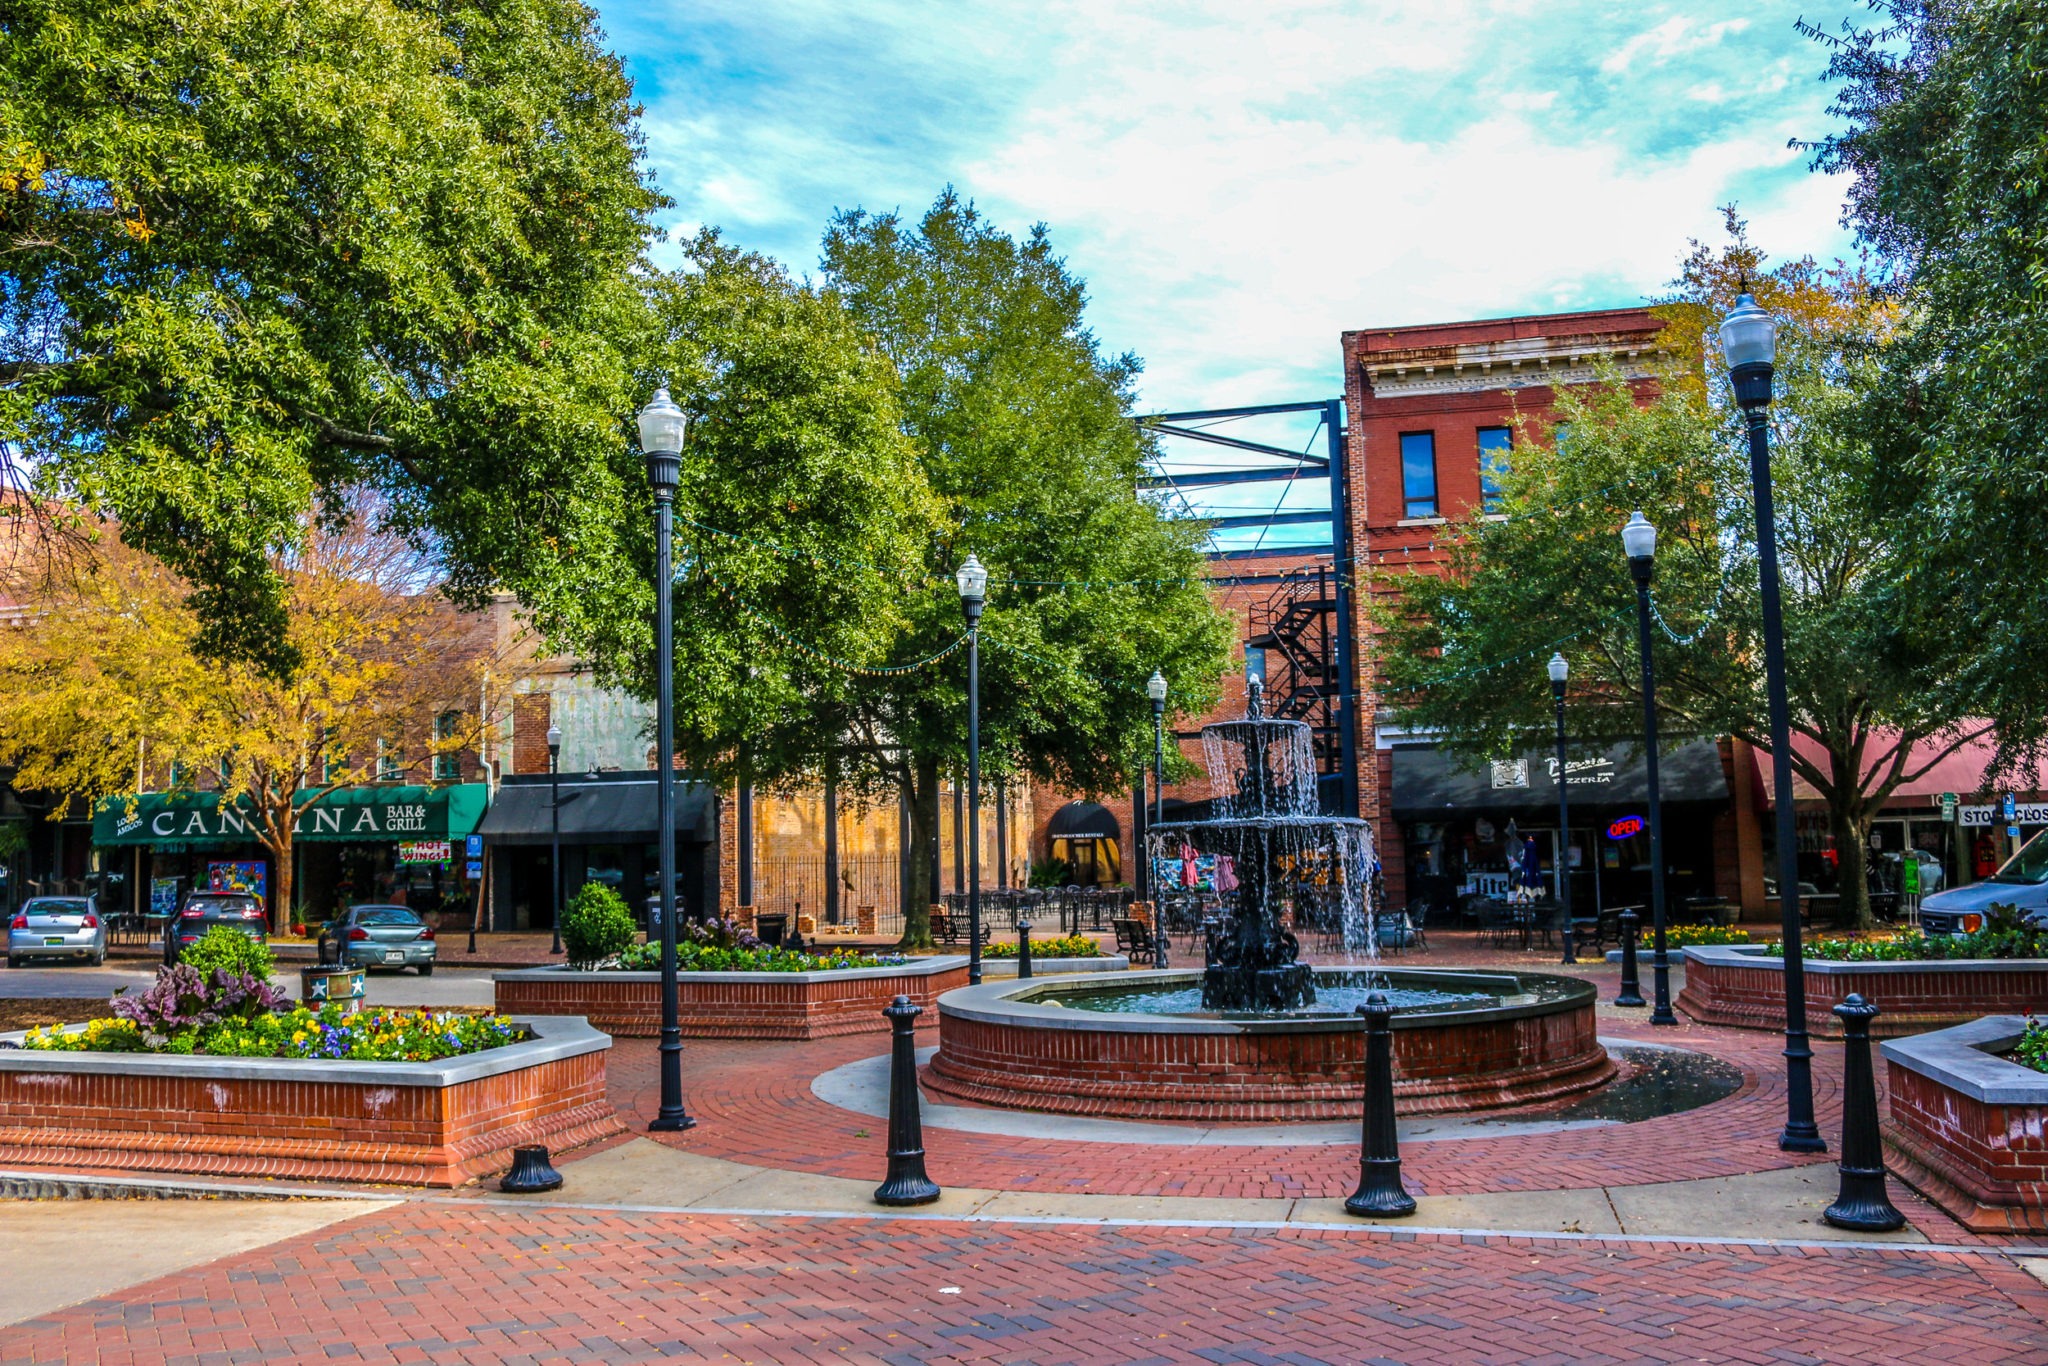 The Broadway fountain is pictured in Columbus, GA.